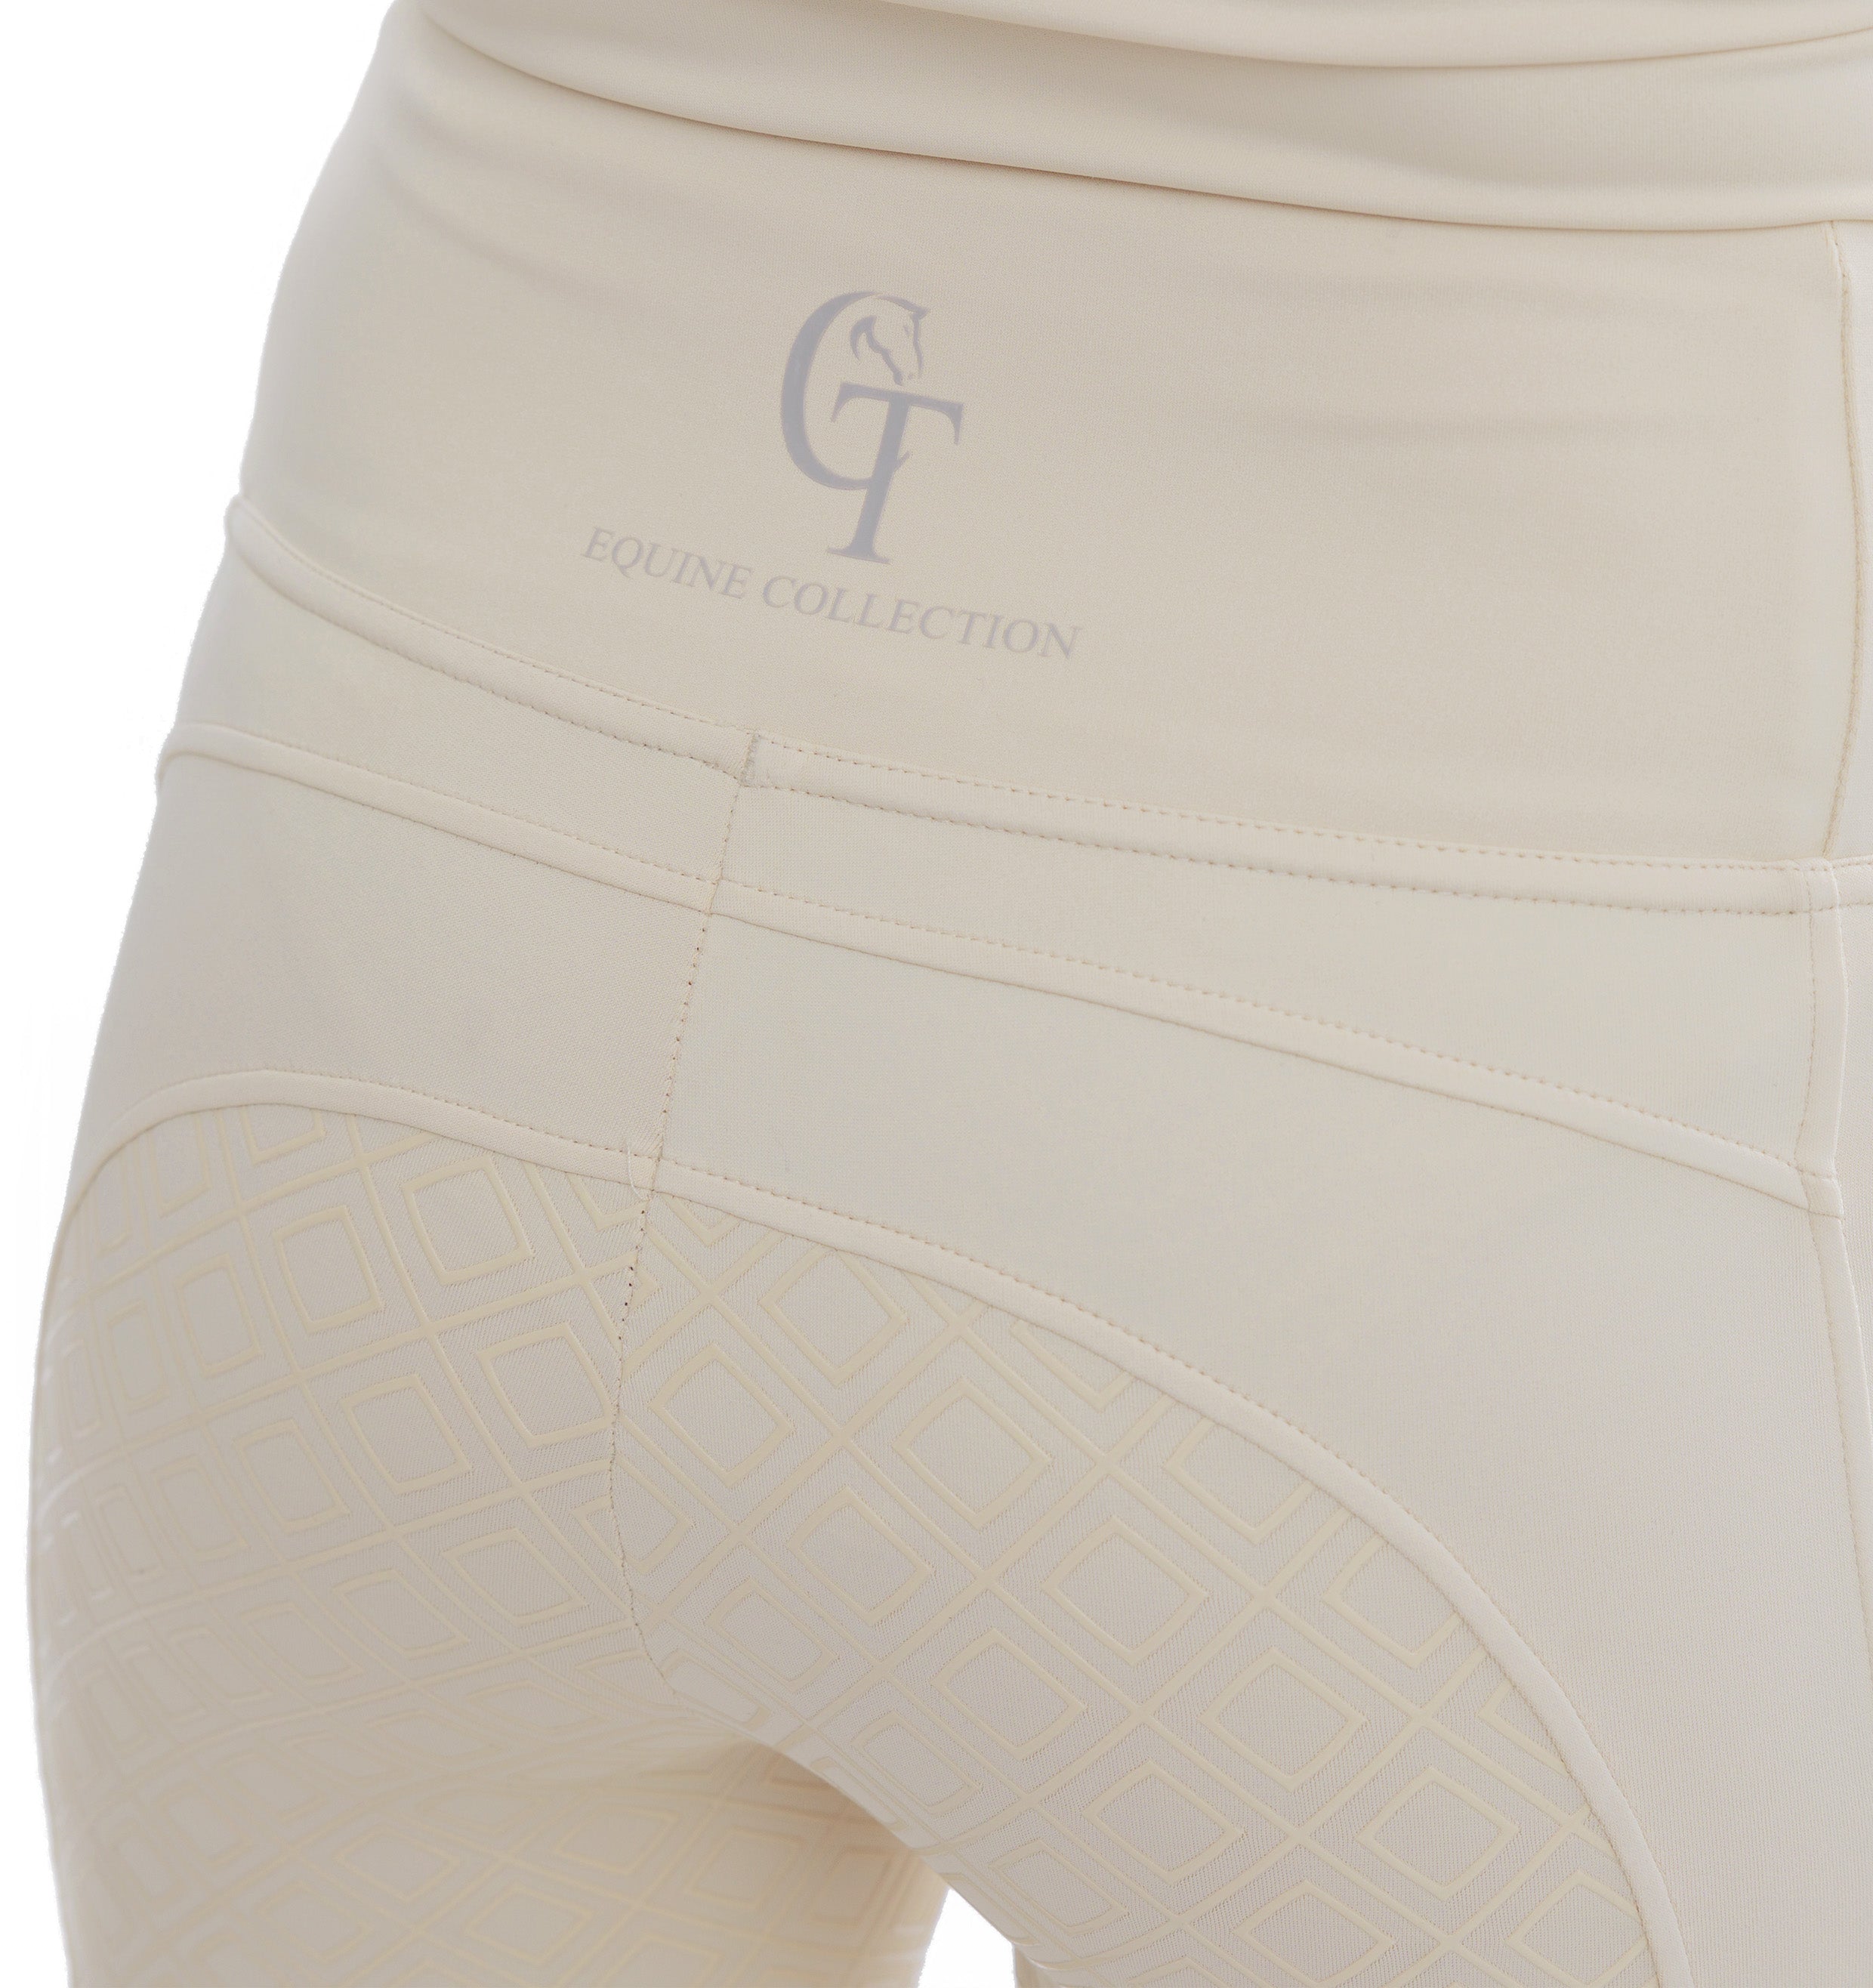 REMY ORGANIC COTTON FULL SEAT JOGGER TIGHTS - Equine Essentials